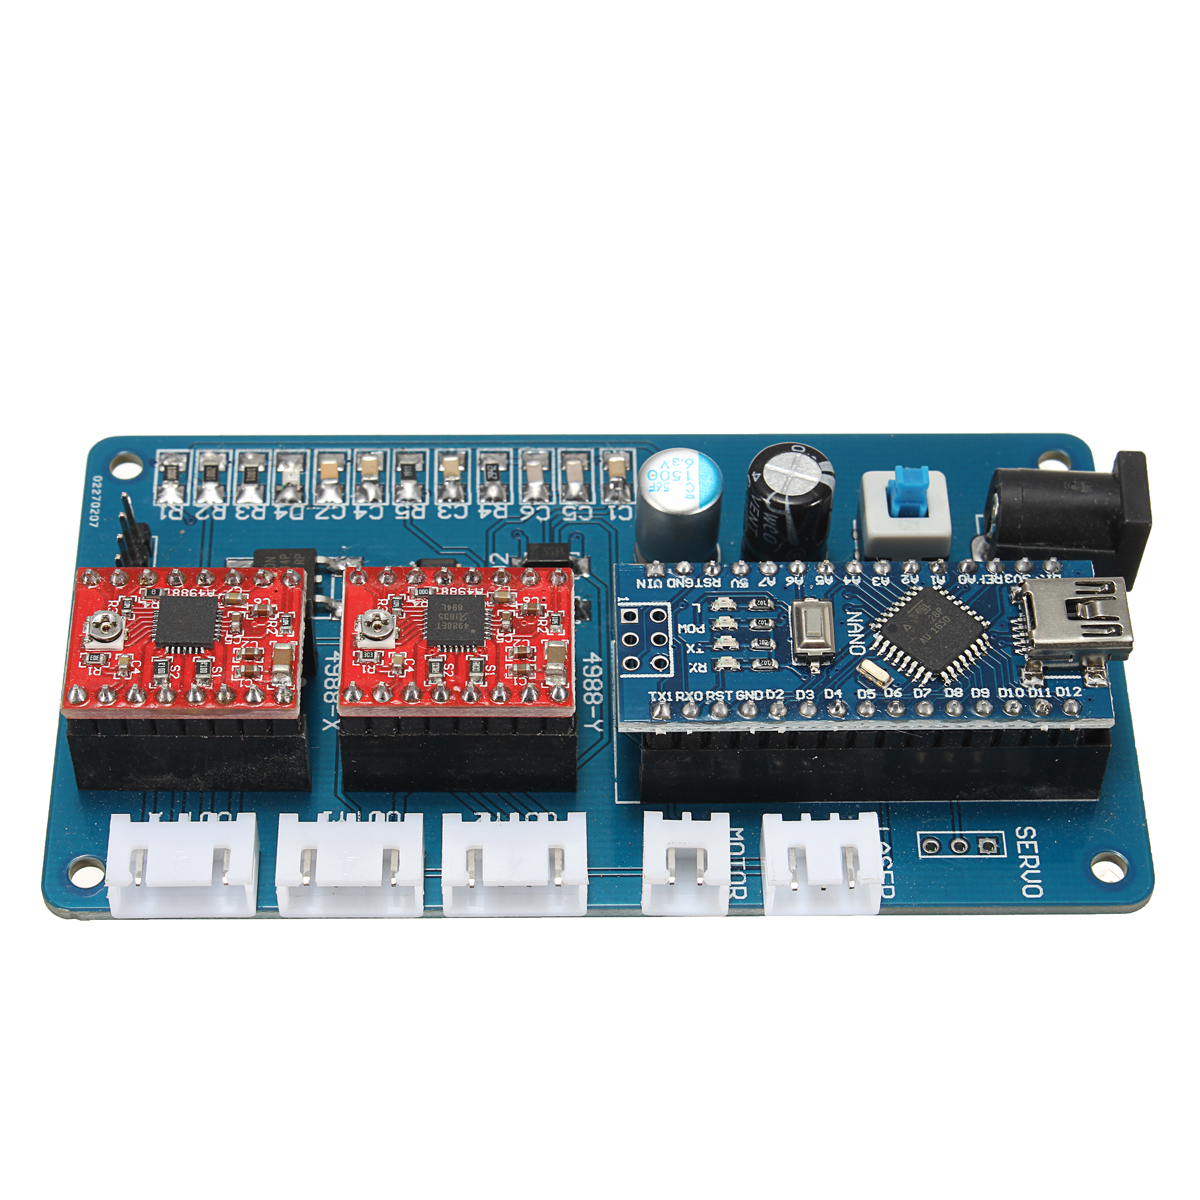 2 Axis GRBL Control Panel Board For DIY Laser Engraving Machine Benbox USB Stepper Driver Board 12